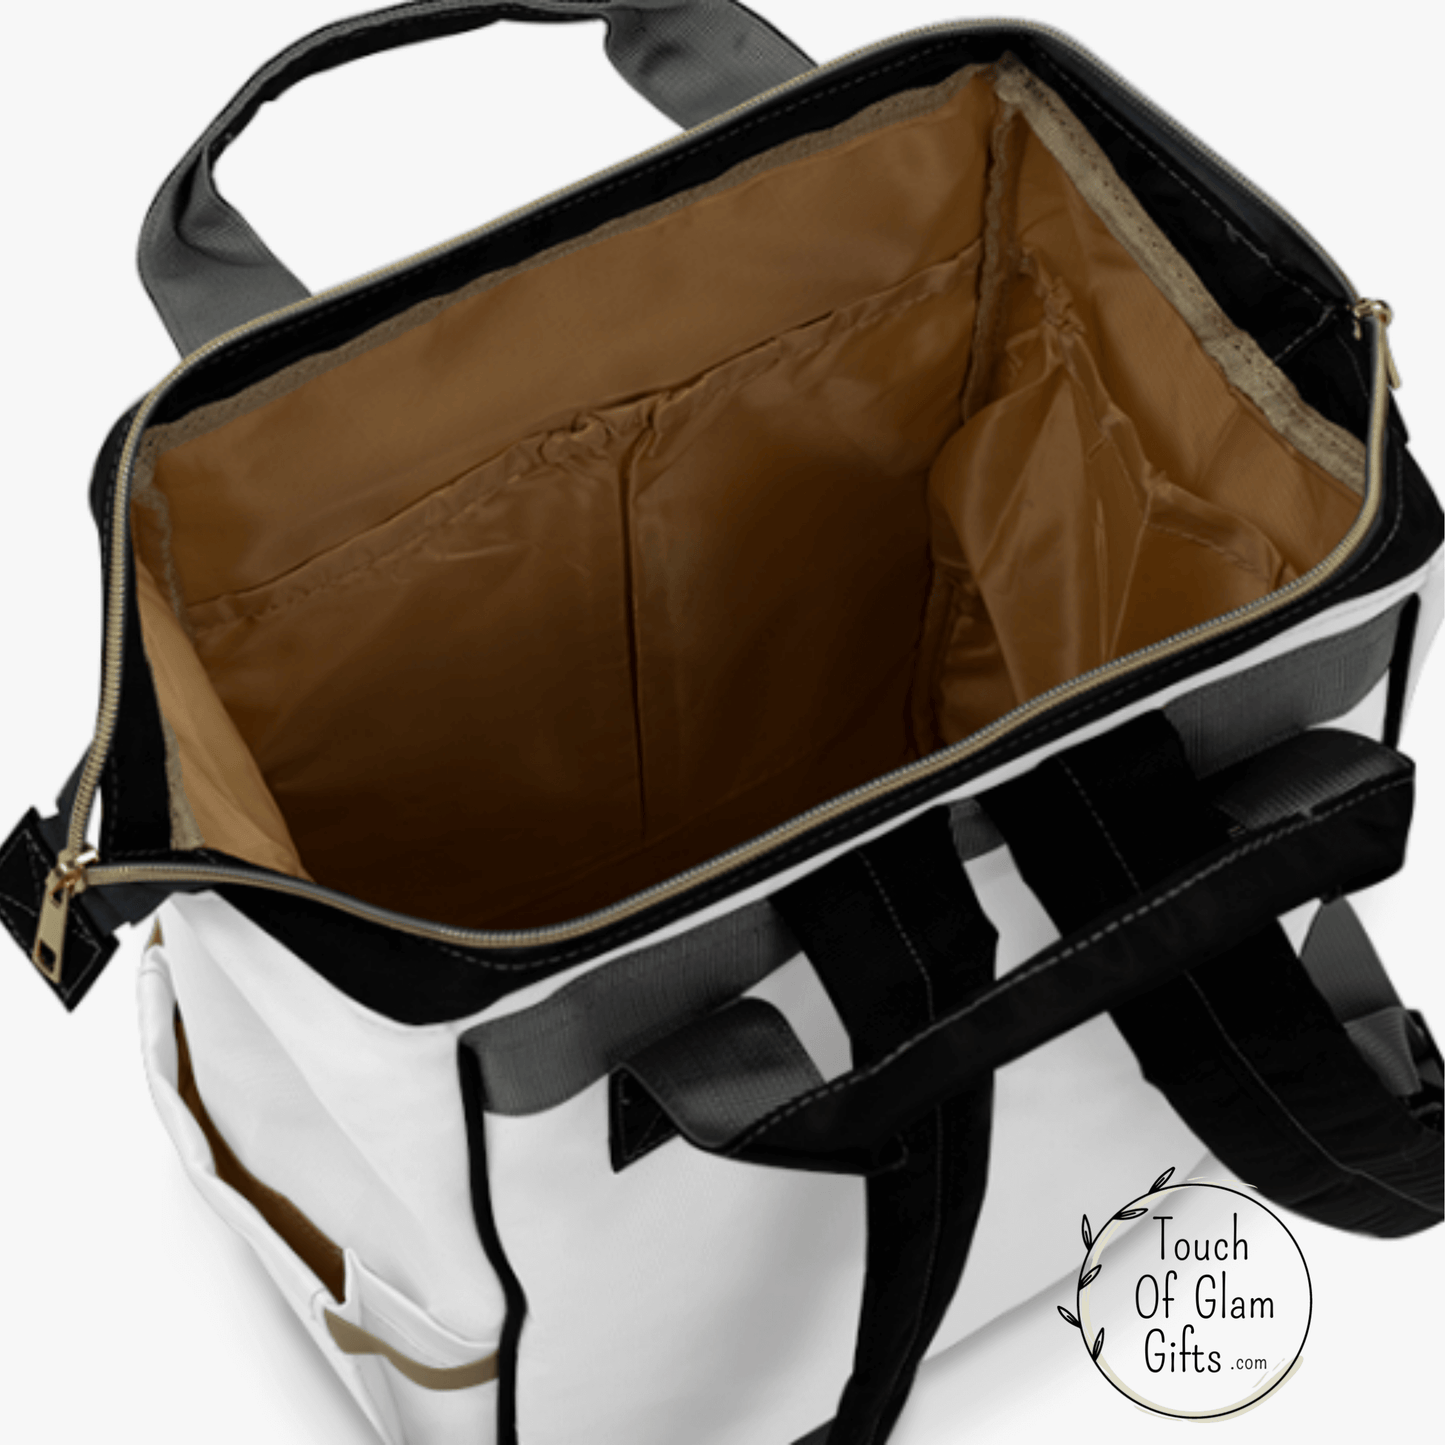 The inside view of our diaper backpack shows tan color nylon fabric with a large opening and the bag stands up on its own.